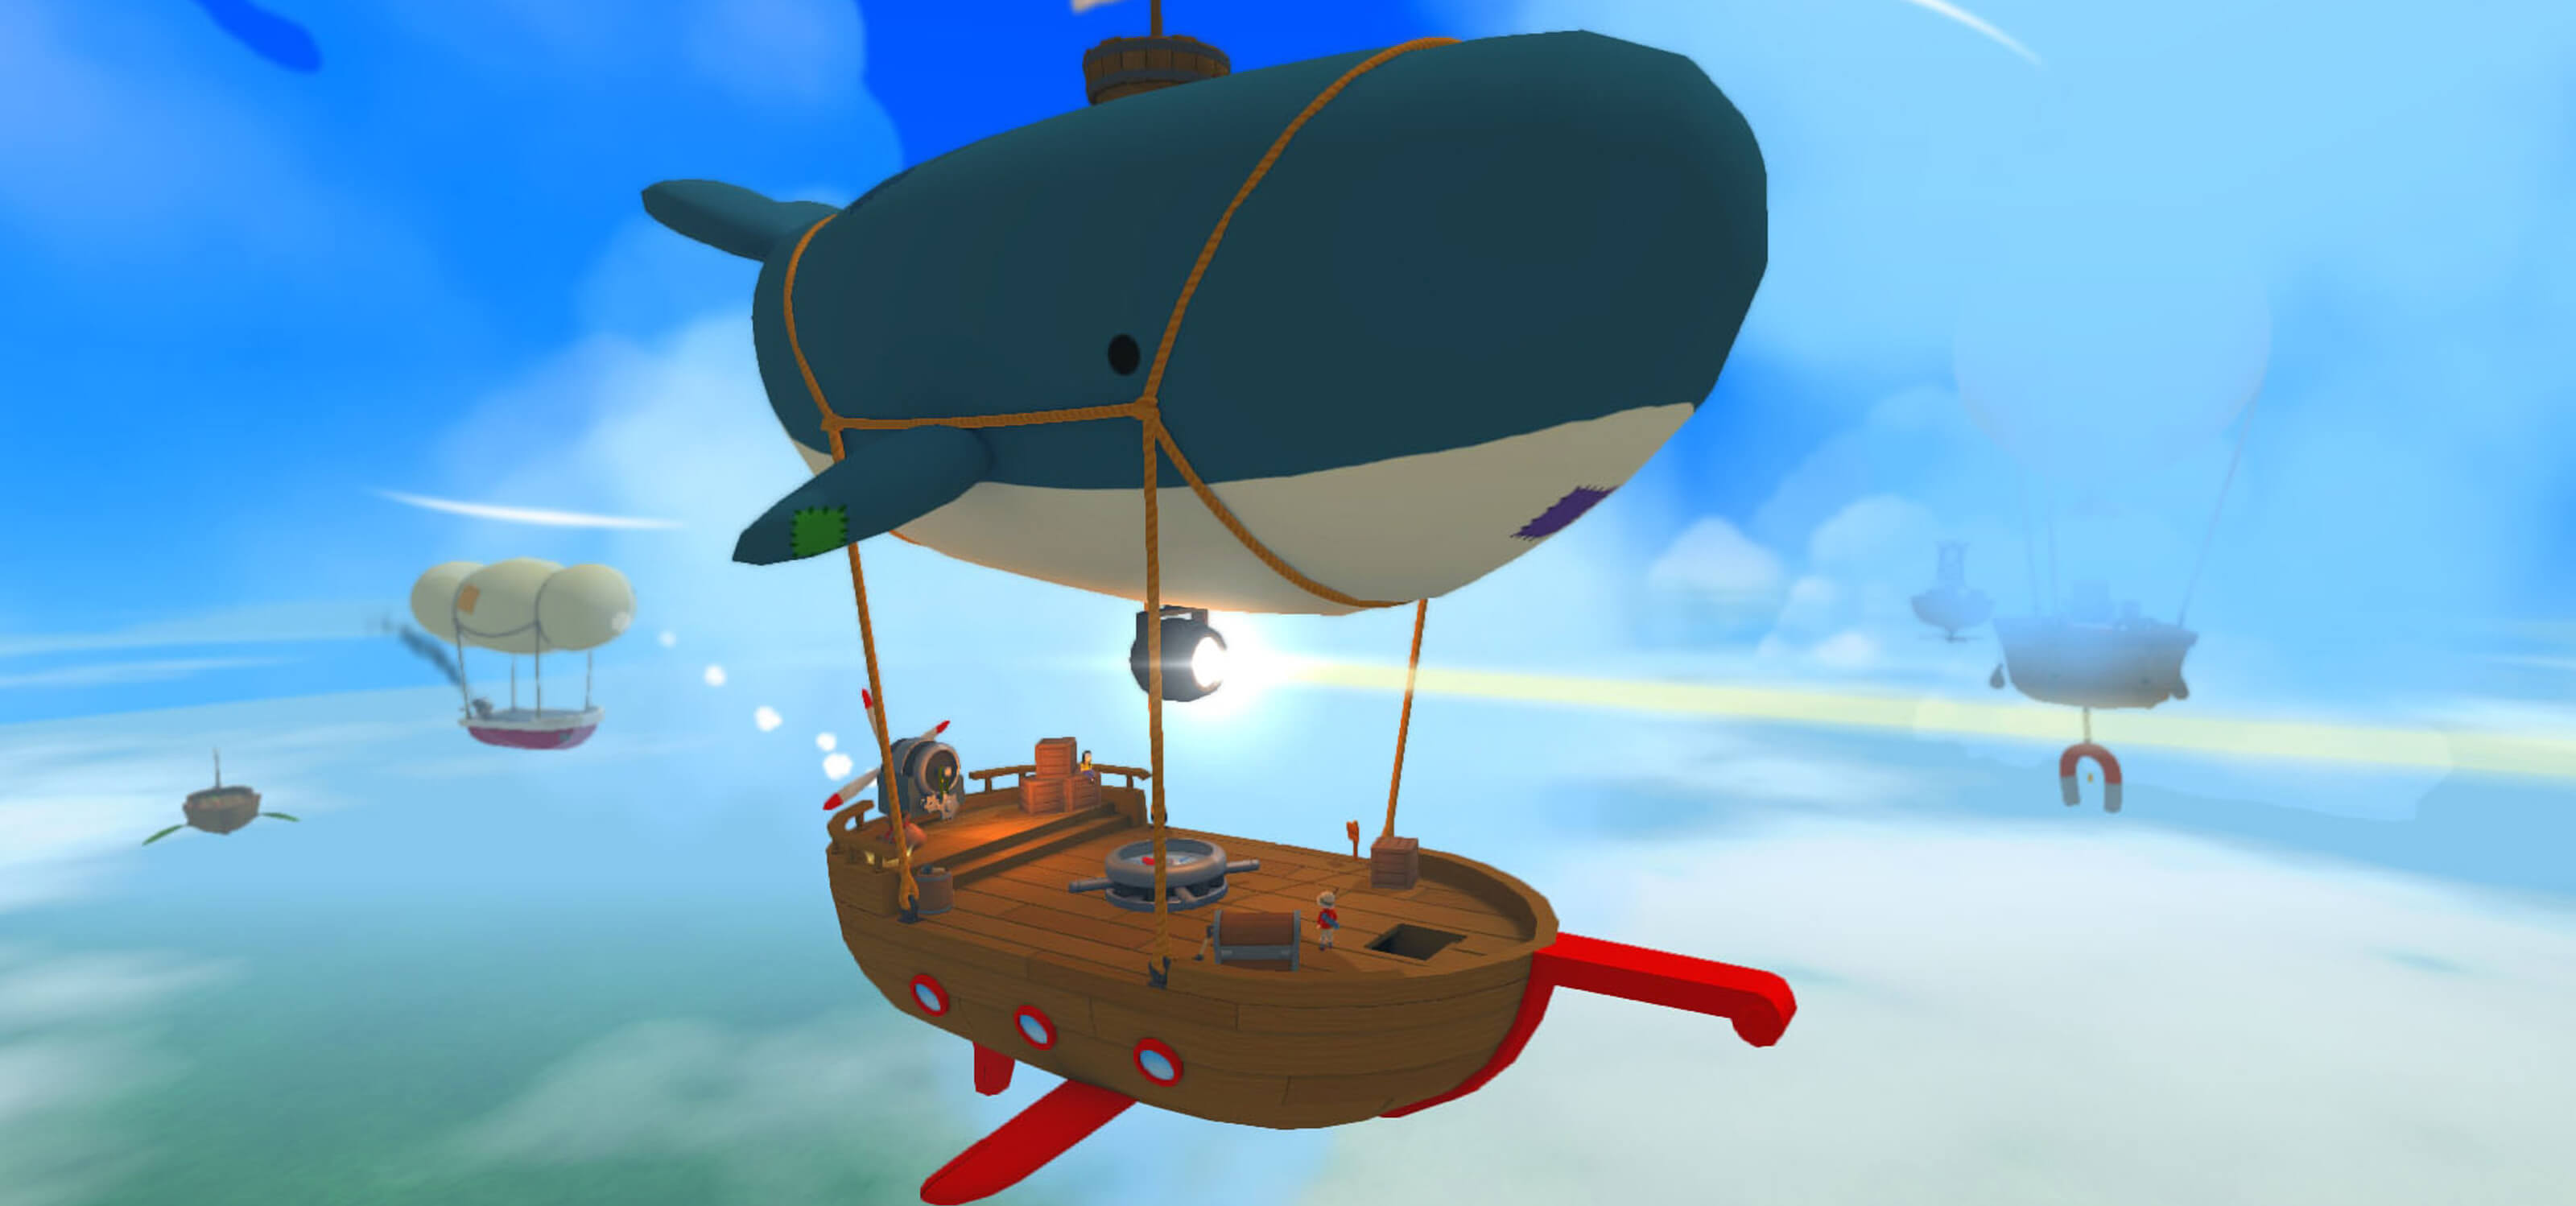 Screenshot from PolyKid Games' Poi, featuring a floating ship dangling from a whale-shaped balloon